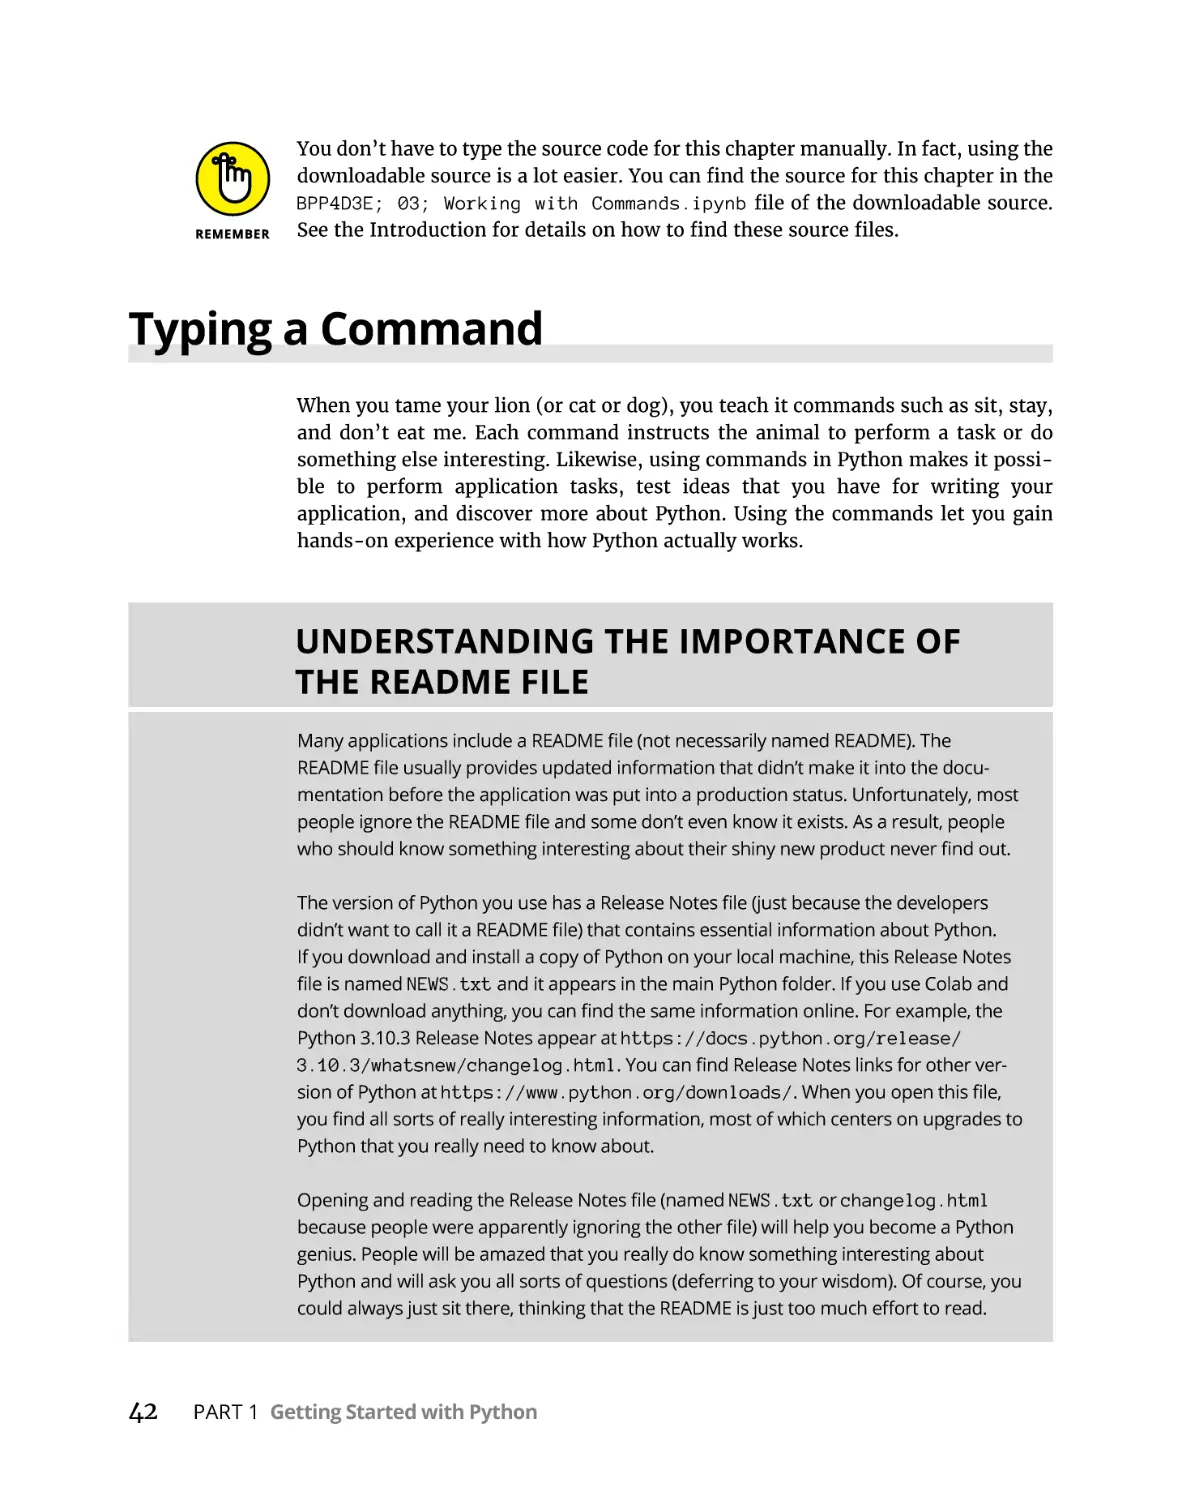 Typing a Command